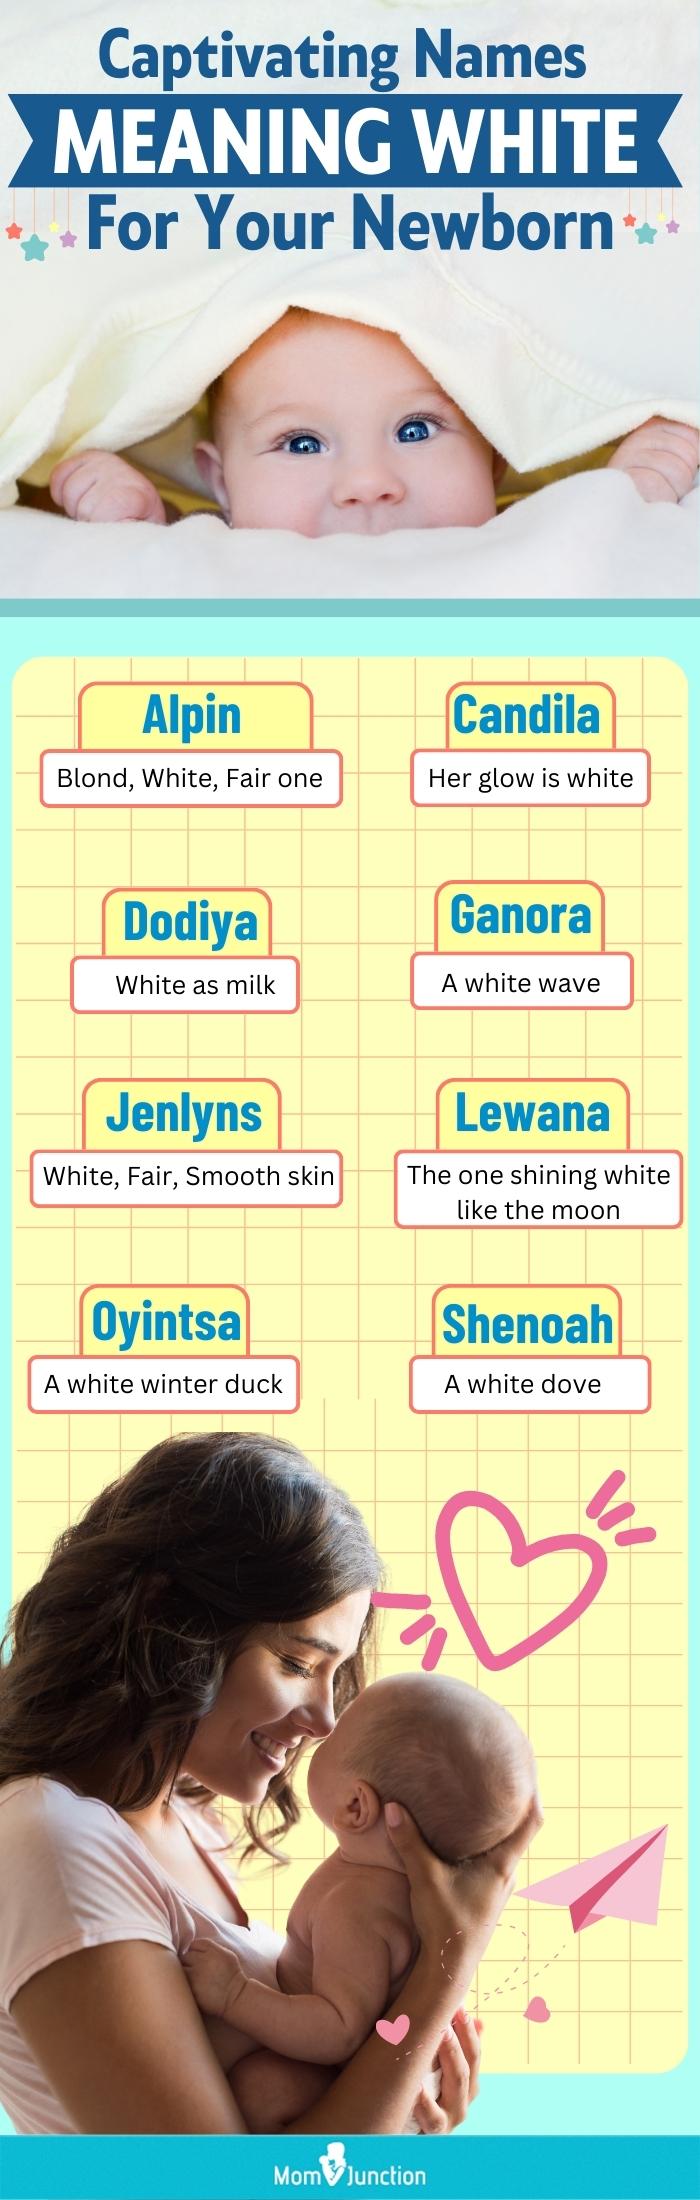 captivating names meaning white for your newborn (infographic)